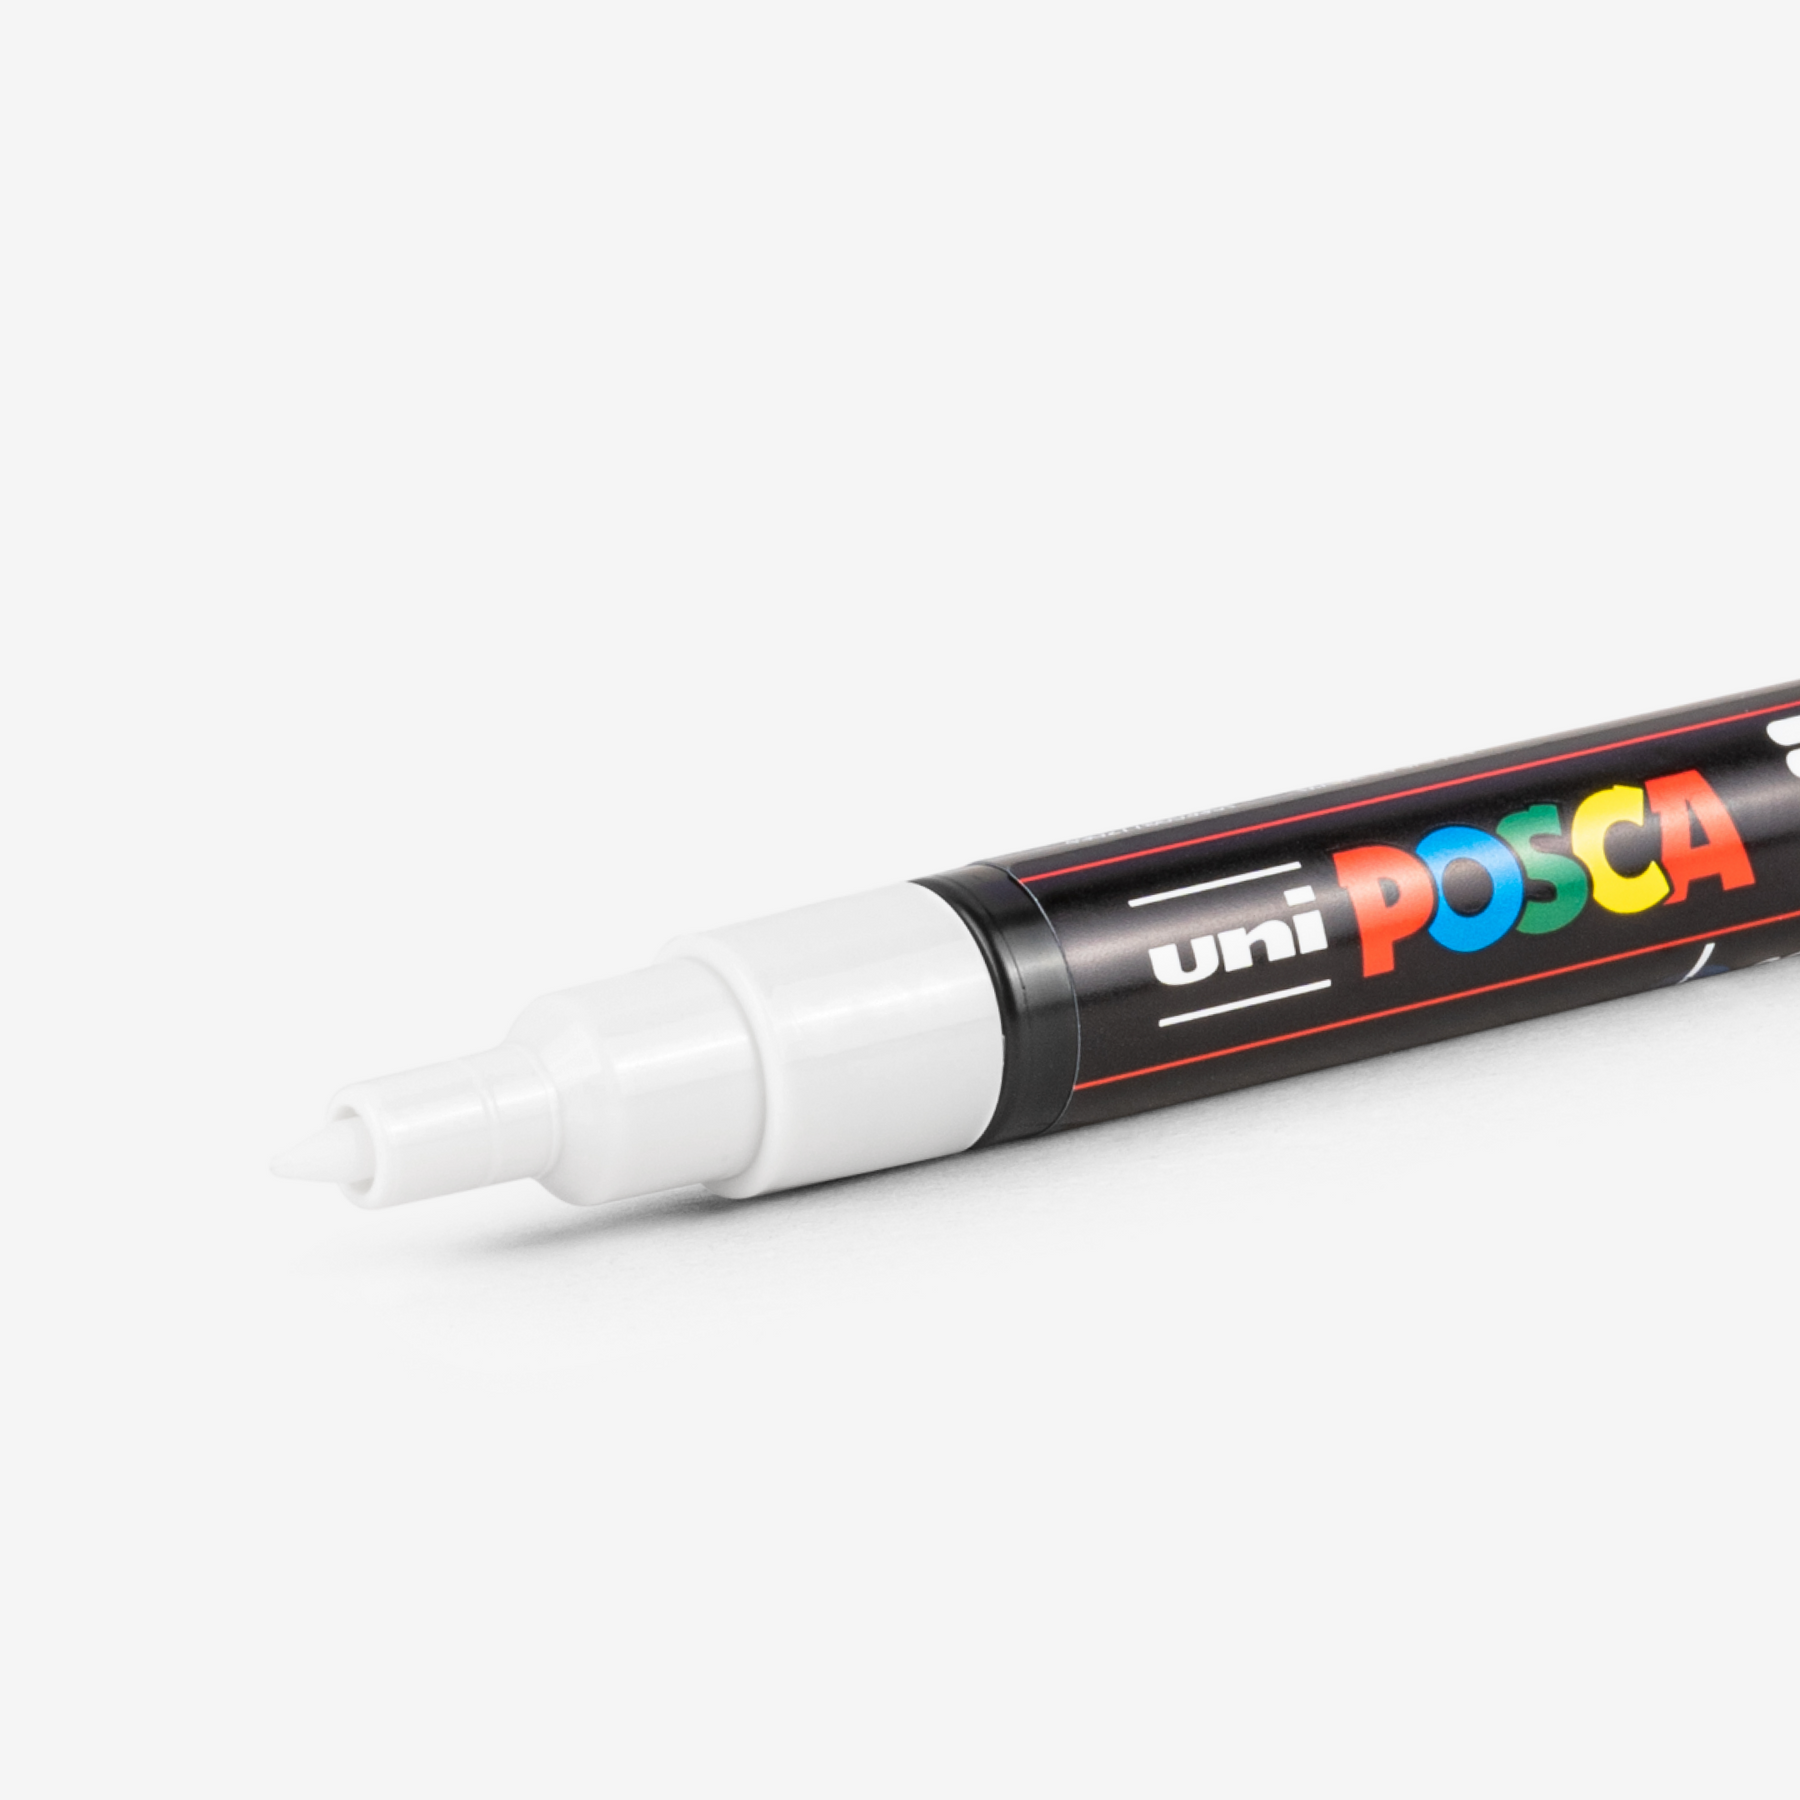  Uni POSCA Paint Marker Pen, 10 White Pen Set (PC3M.1) - Fine  Point - Odorless Water Resistant Pen Maker, with Original Sticky Notes :  Office Products